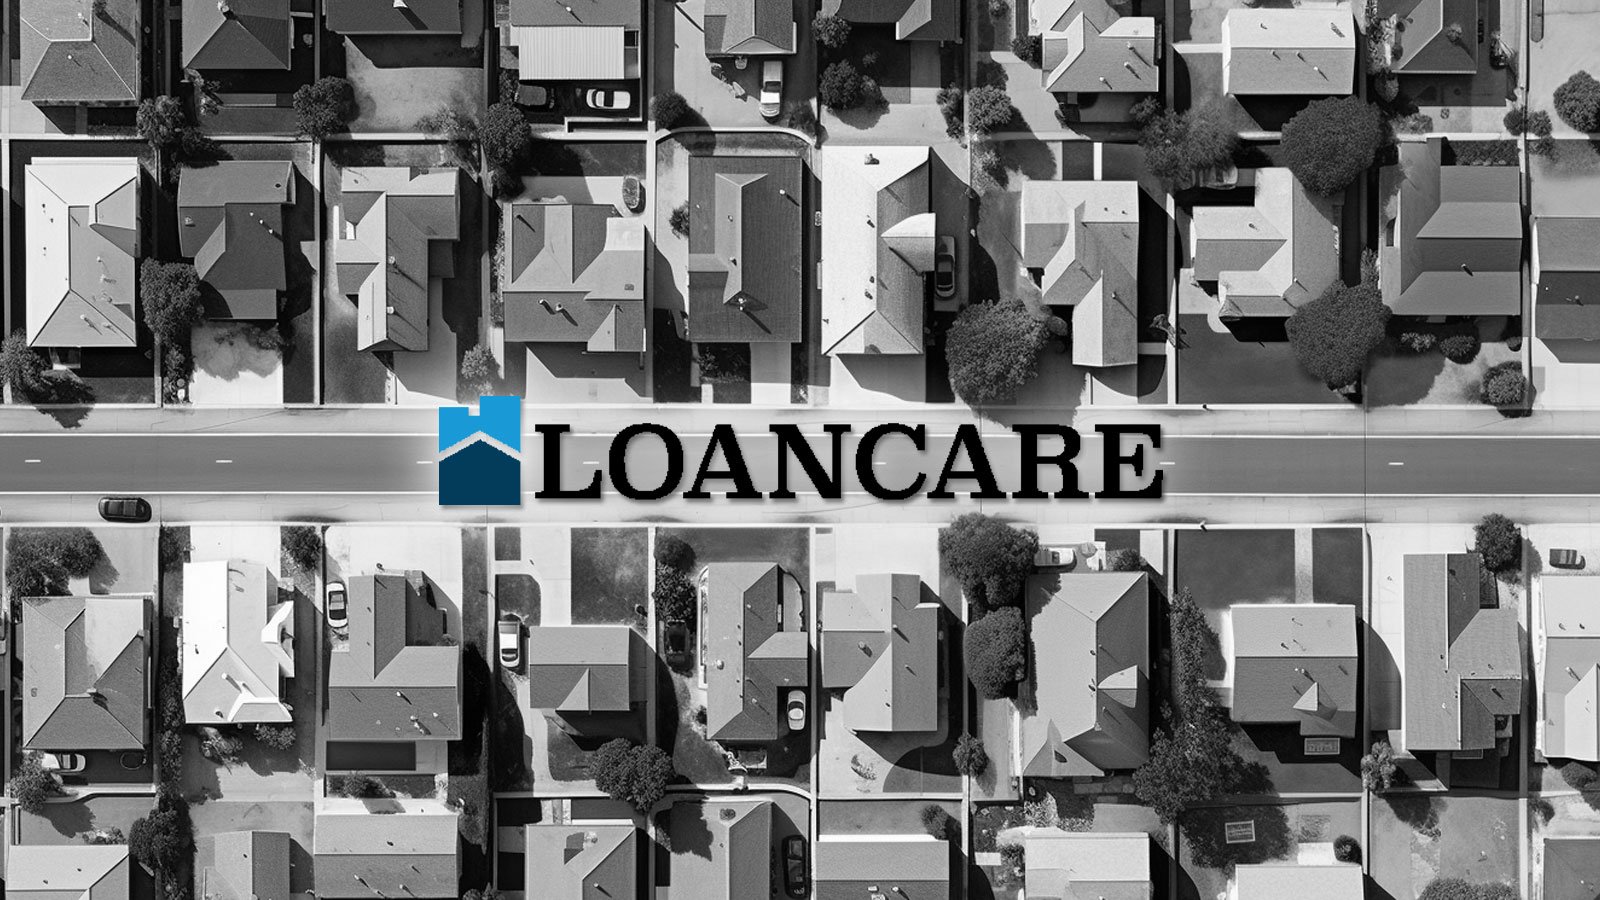 Mortgage firm LoanCare warns 1.3 million people of data breach